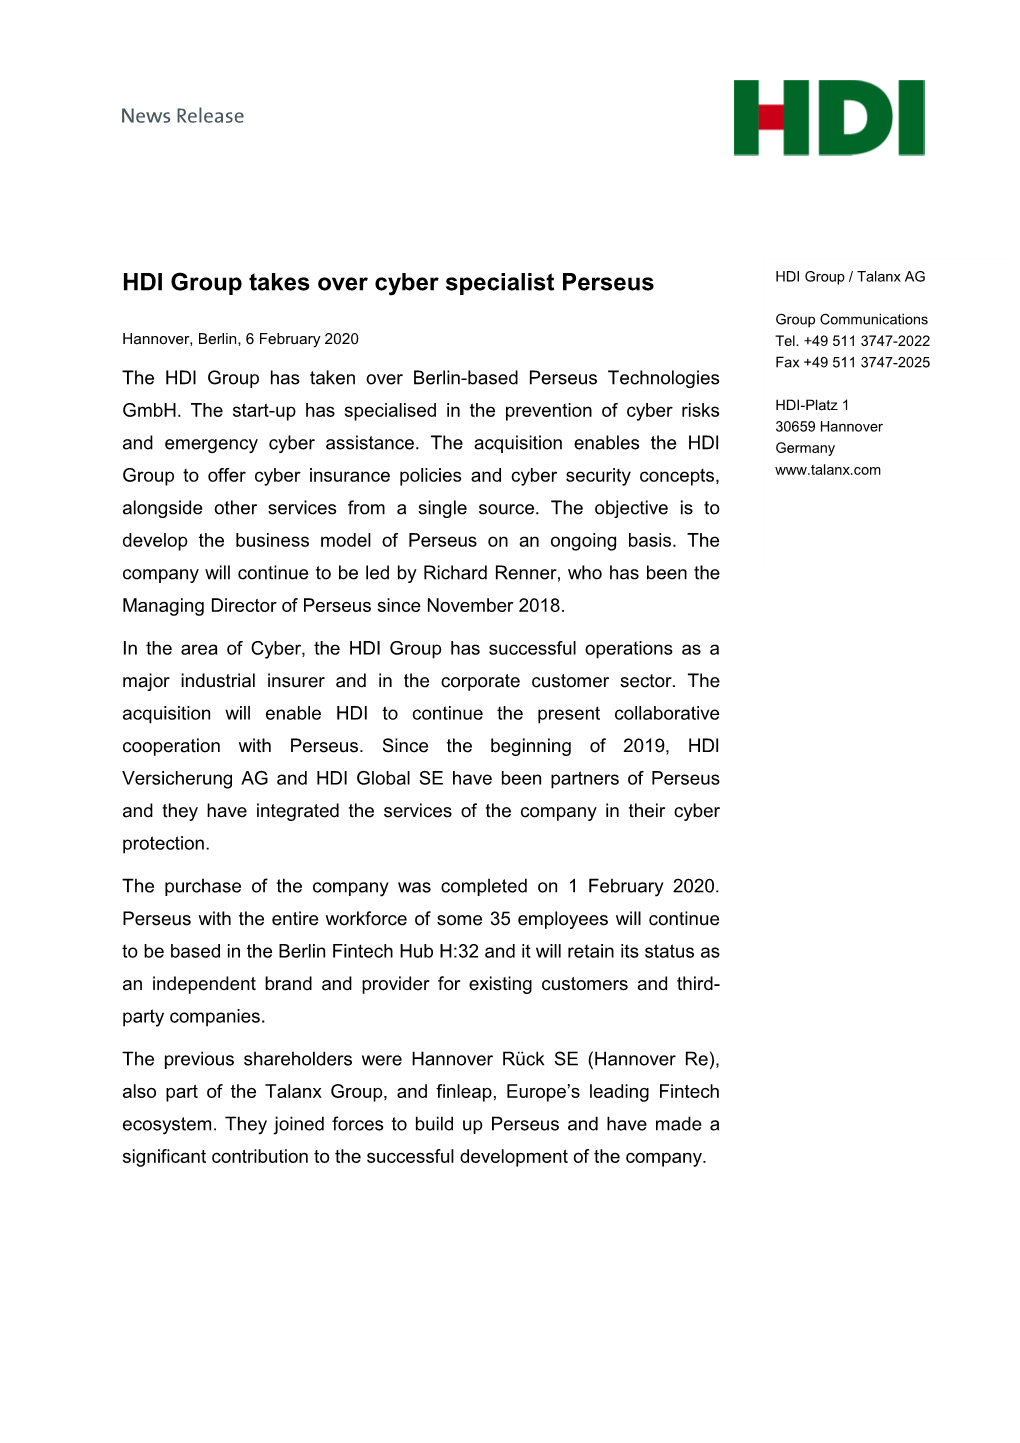 HDI Group Takes Over Cyber Specialist Perseus HDI Group / Talanx AG